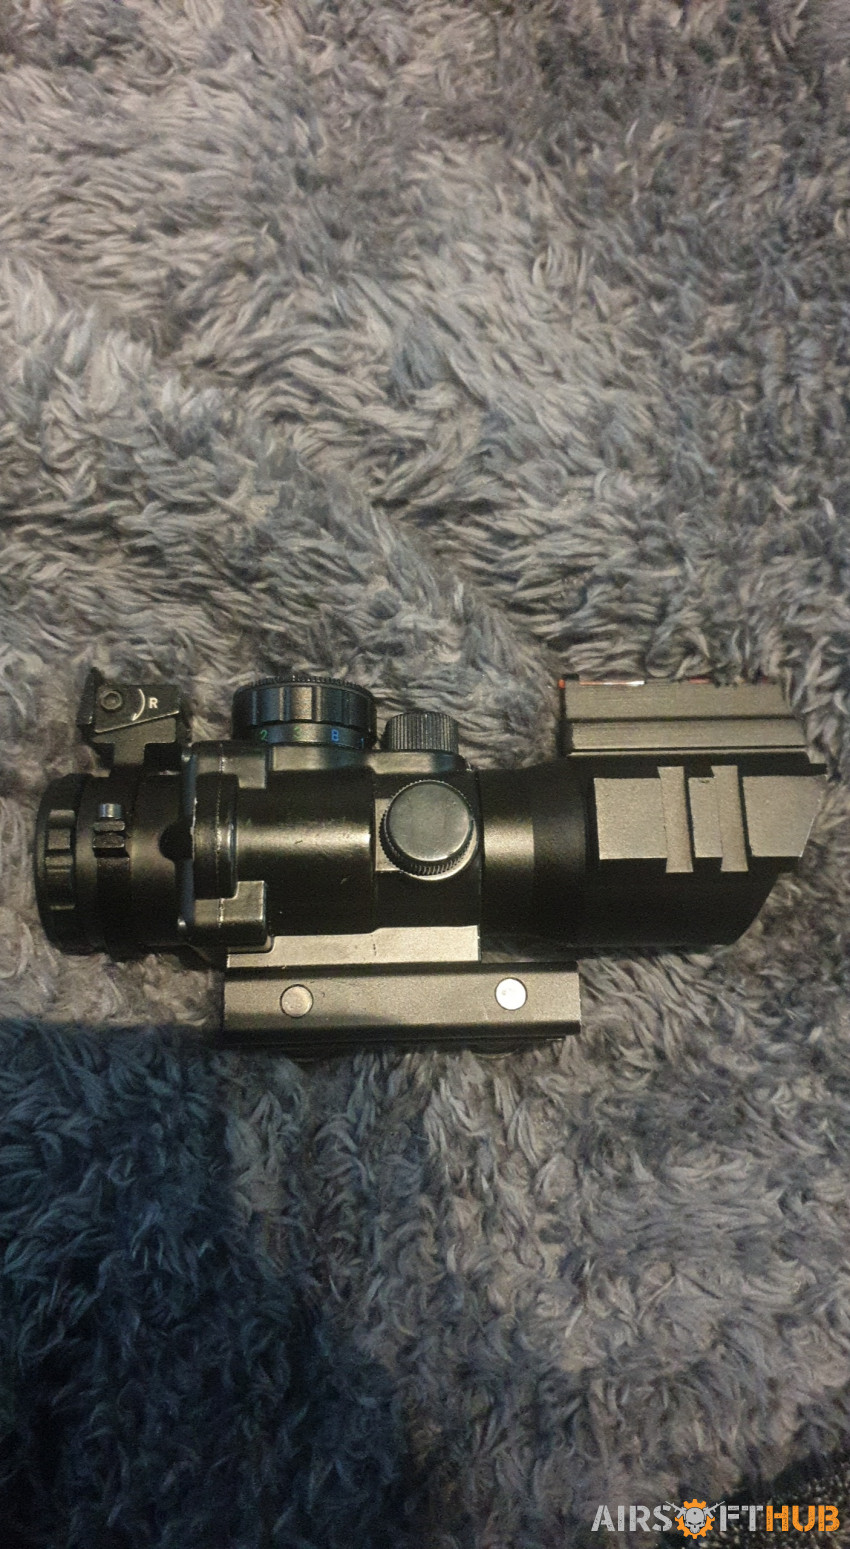 Very100 4x Acog Scope Airsoft Hub Buy And Sell Used Airsoft Equipment